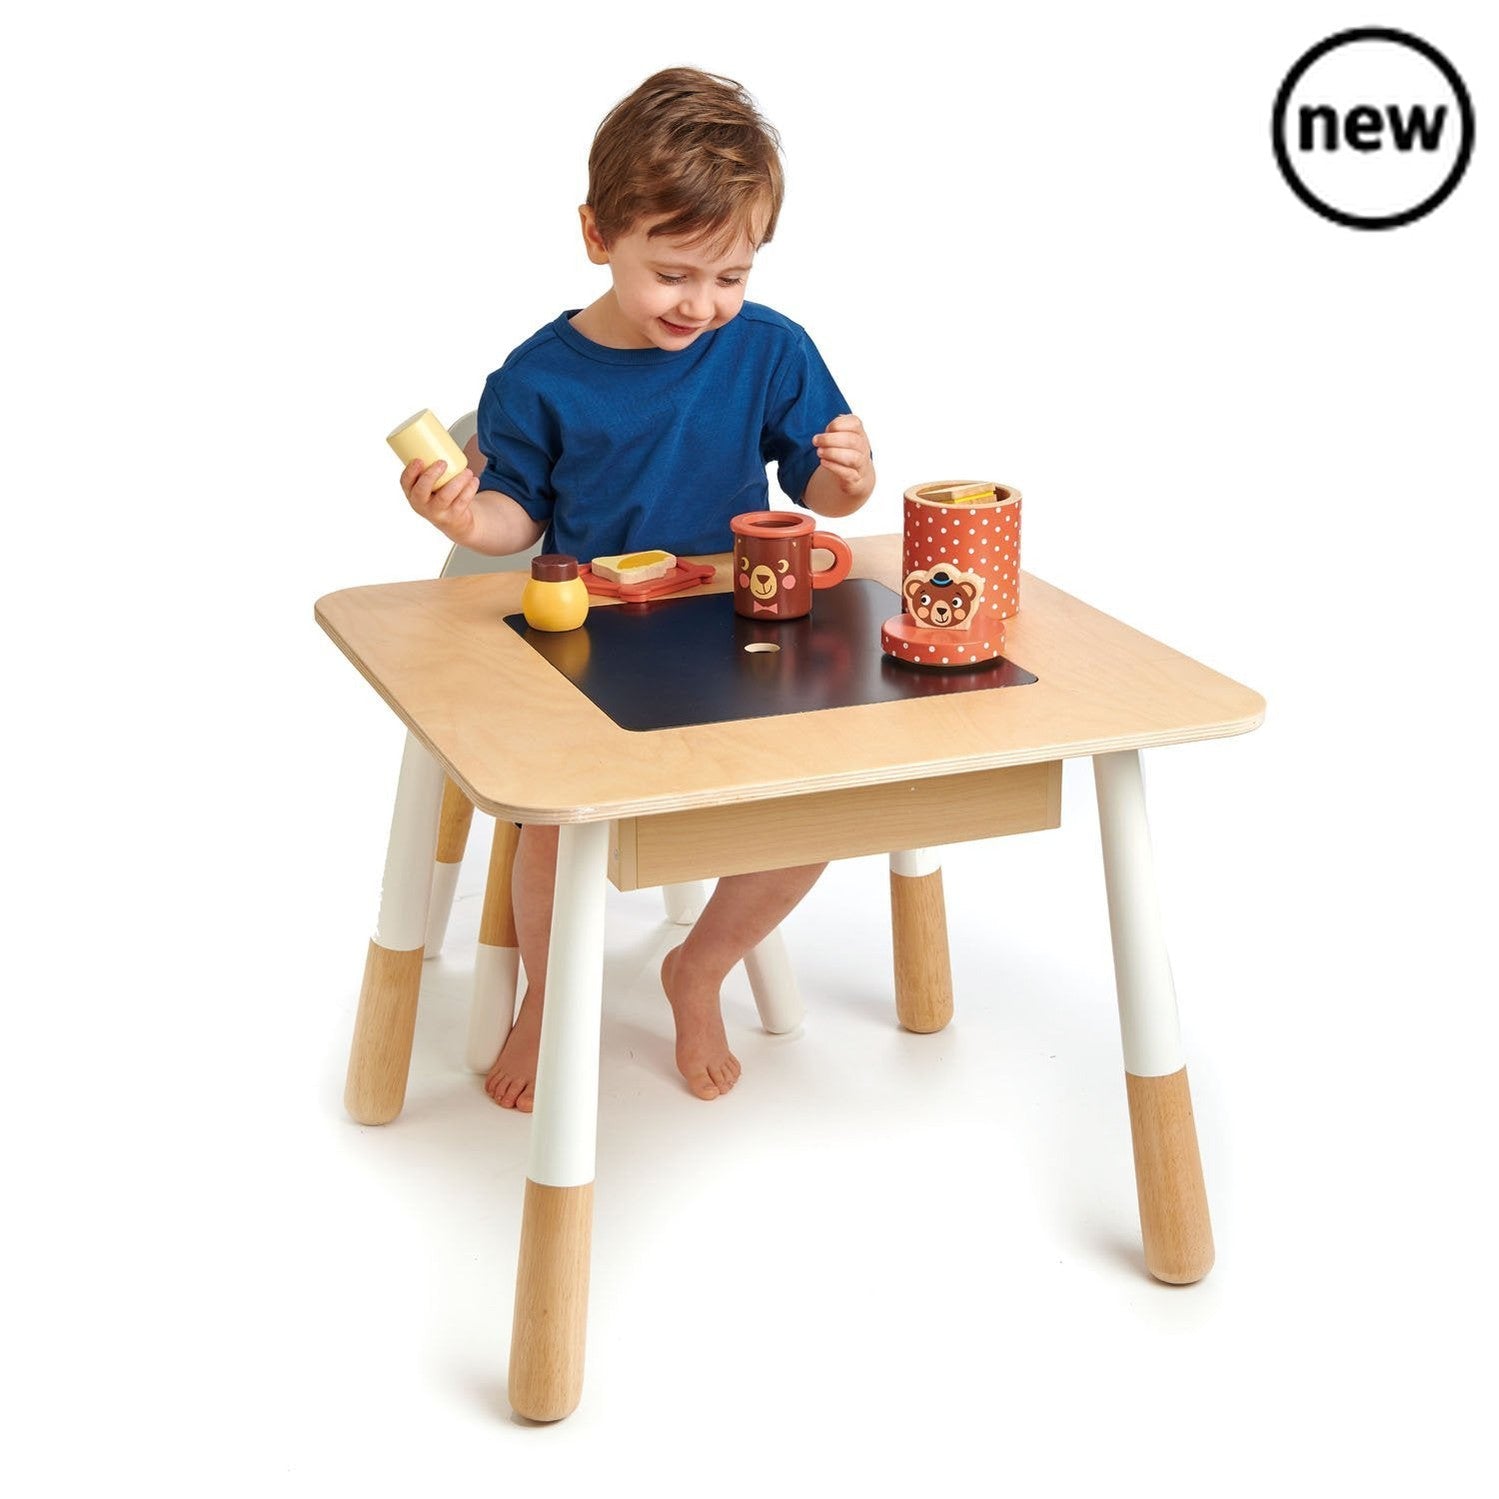 Tenderleaf Toys Wooden Forest Table, This beautiful and fun forest table by Tender Leaf Toys will brighten up any room. Perfectly sized for little ones using quality plywood and a fun design this table is great for table based play, learning, snack time, arts and crafts or even to sit and read a book to their favorite teddy. Comes with a clever chalkboard central panel and a hidden compartment underneath to store the crayons and chalks. NOTE: The removable centre piece has been upgraded to plywood rather th